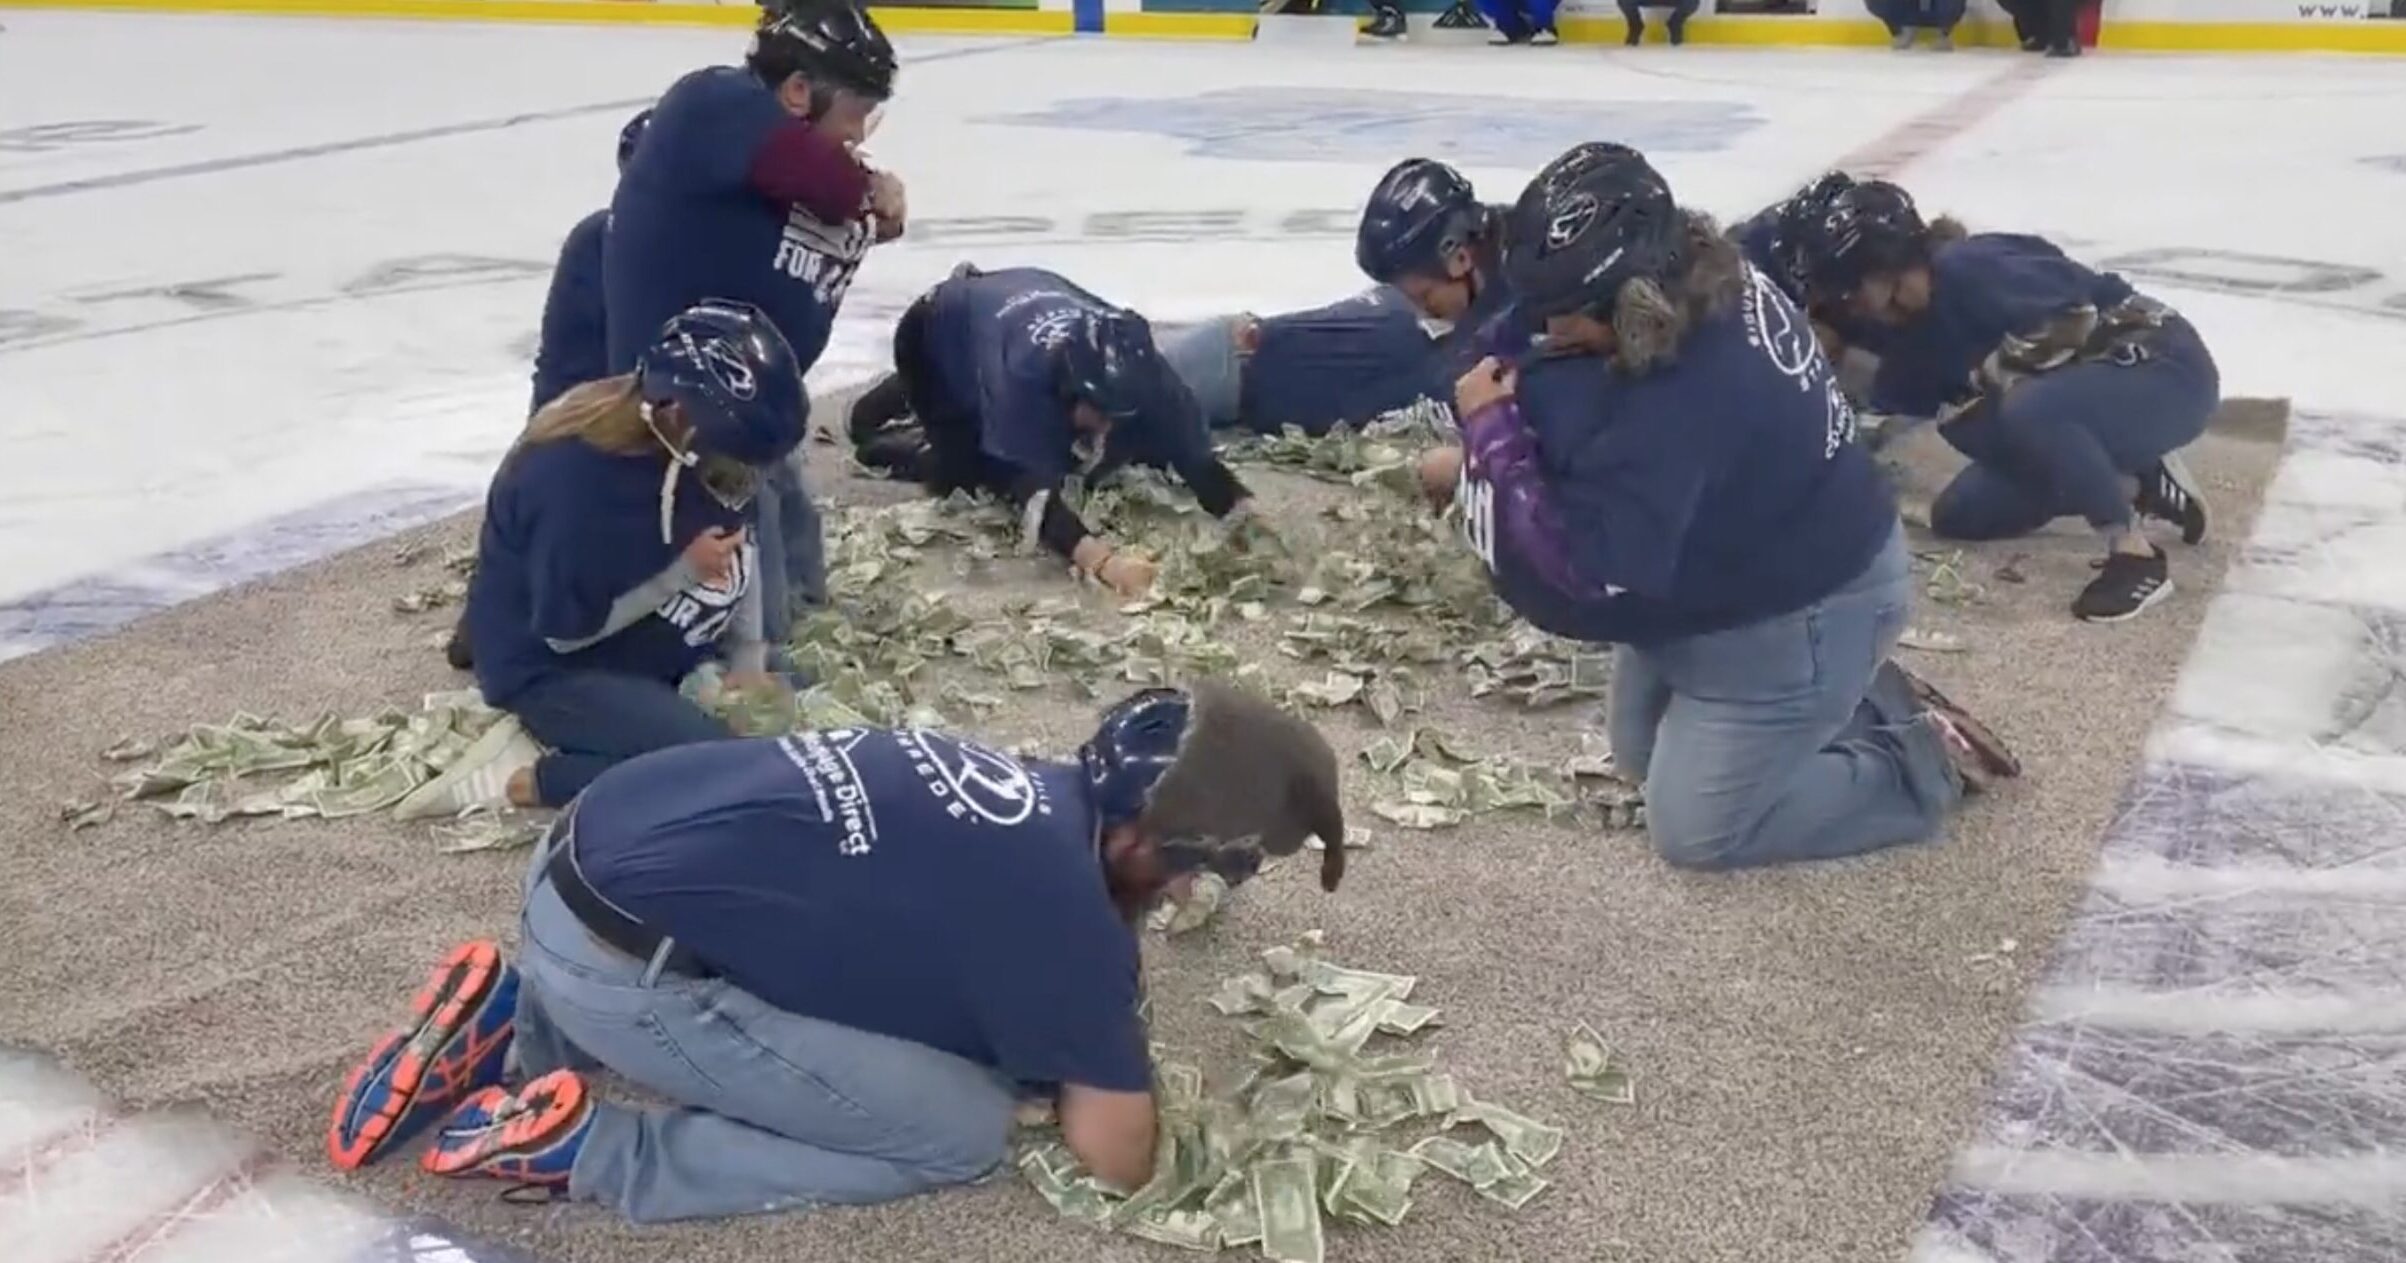 WATCH: A Hockey Team Made a Bunch of Teachers Scrounge Around on Their Knees Picking Up $1 Bills to Fund Their Classes